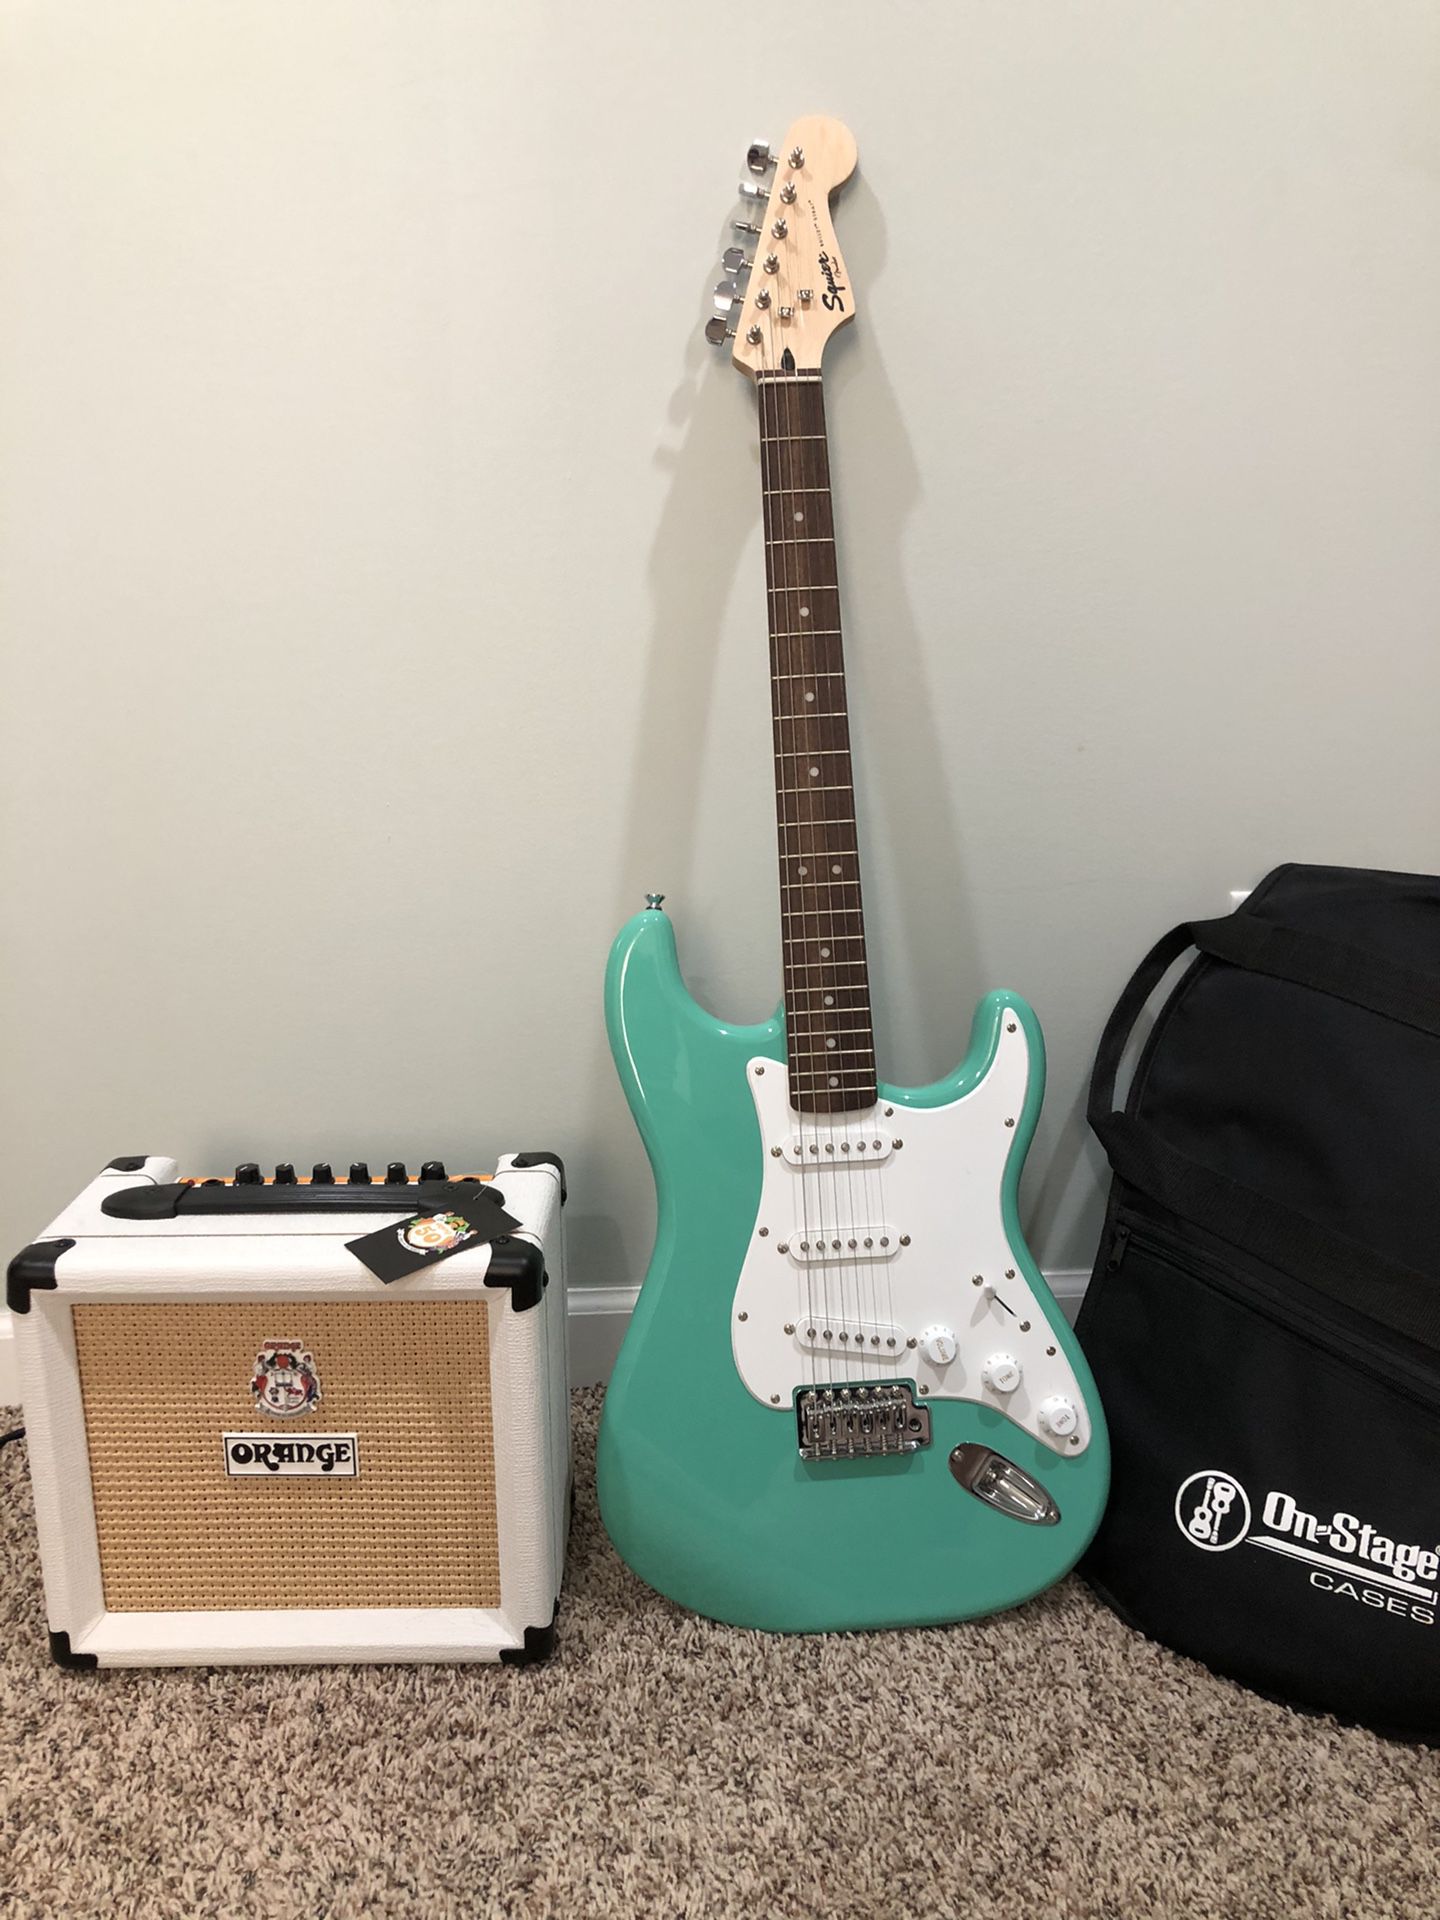 Squire Guitar and Orange amp package